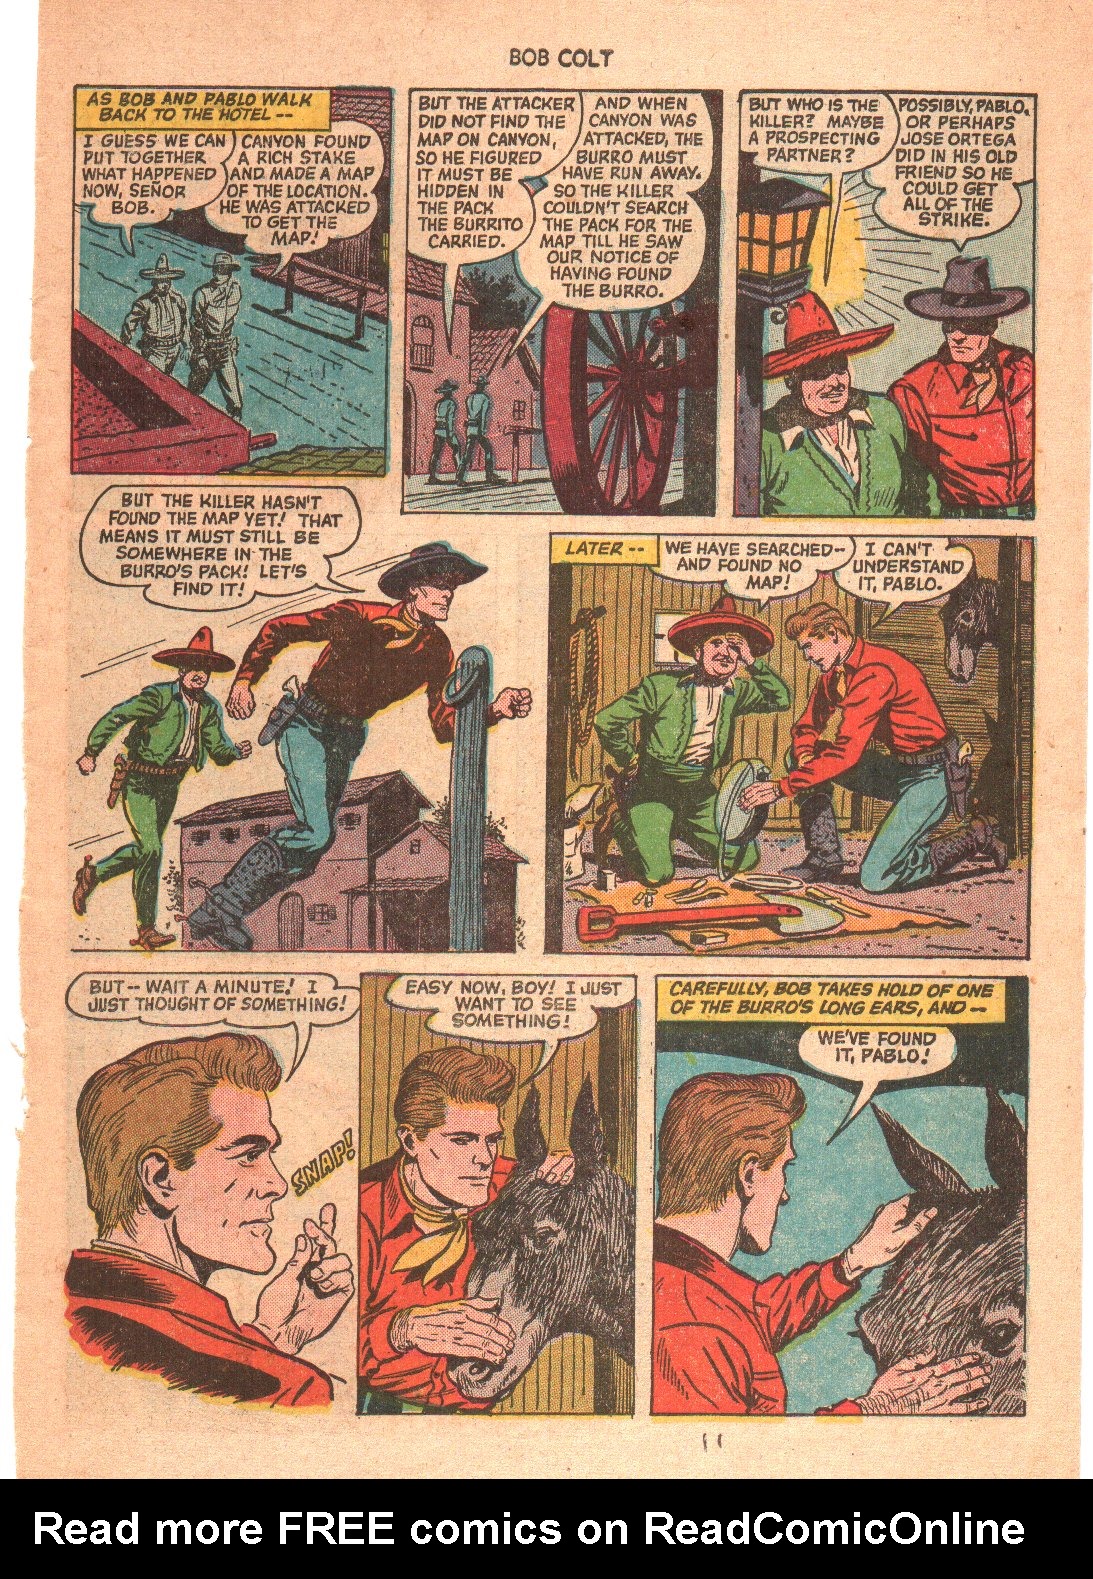 Read online Bob Colt Western comic -  Issue #4 - 11